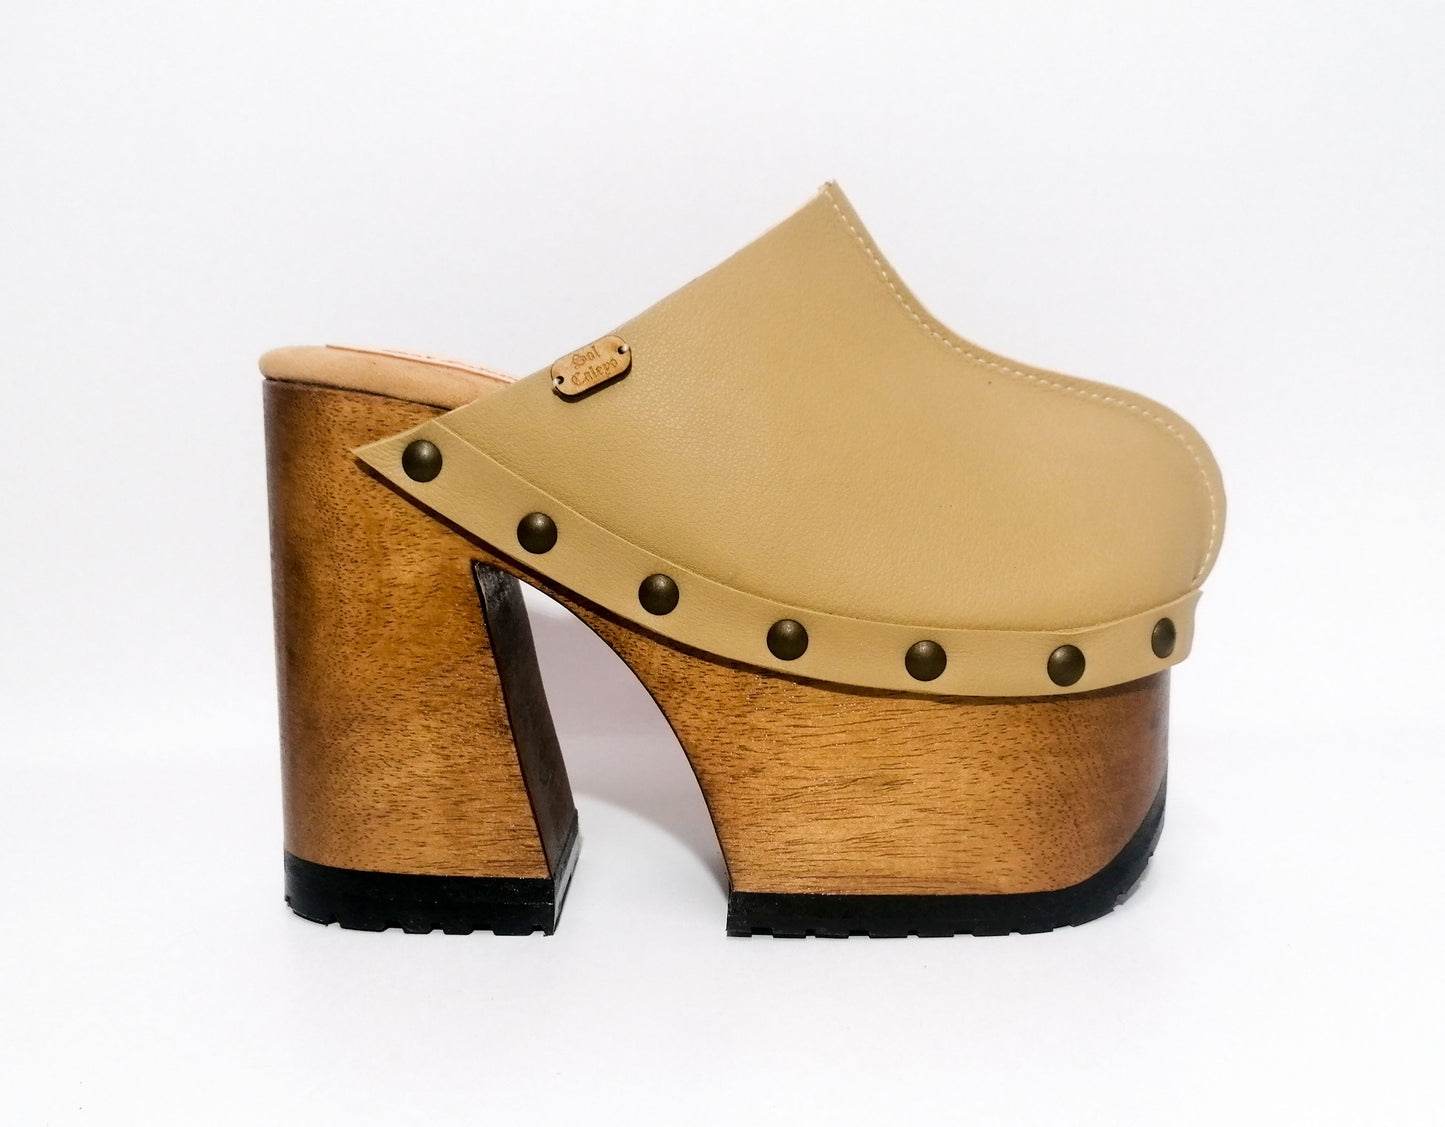 Beige leather clog vintage style 70s. Leather clog with super high wooden heel. Vintage style wooden clog. Sizes 34 to 47. High quality handmade leather shoes by sol Caleyo. Sustainable fashion.